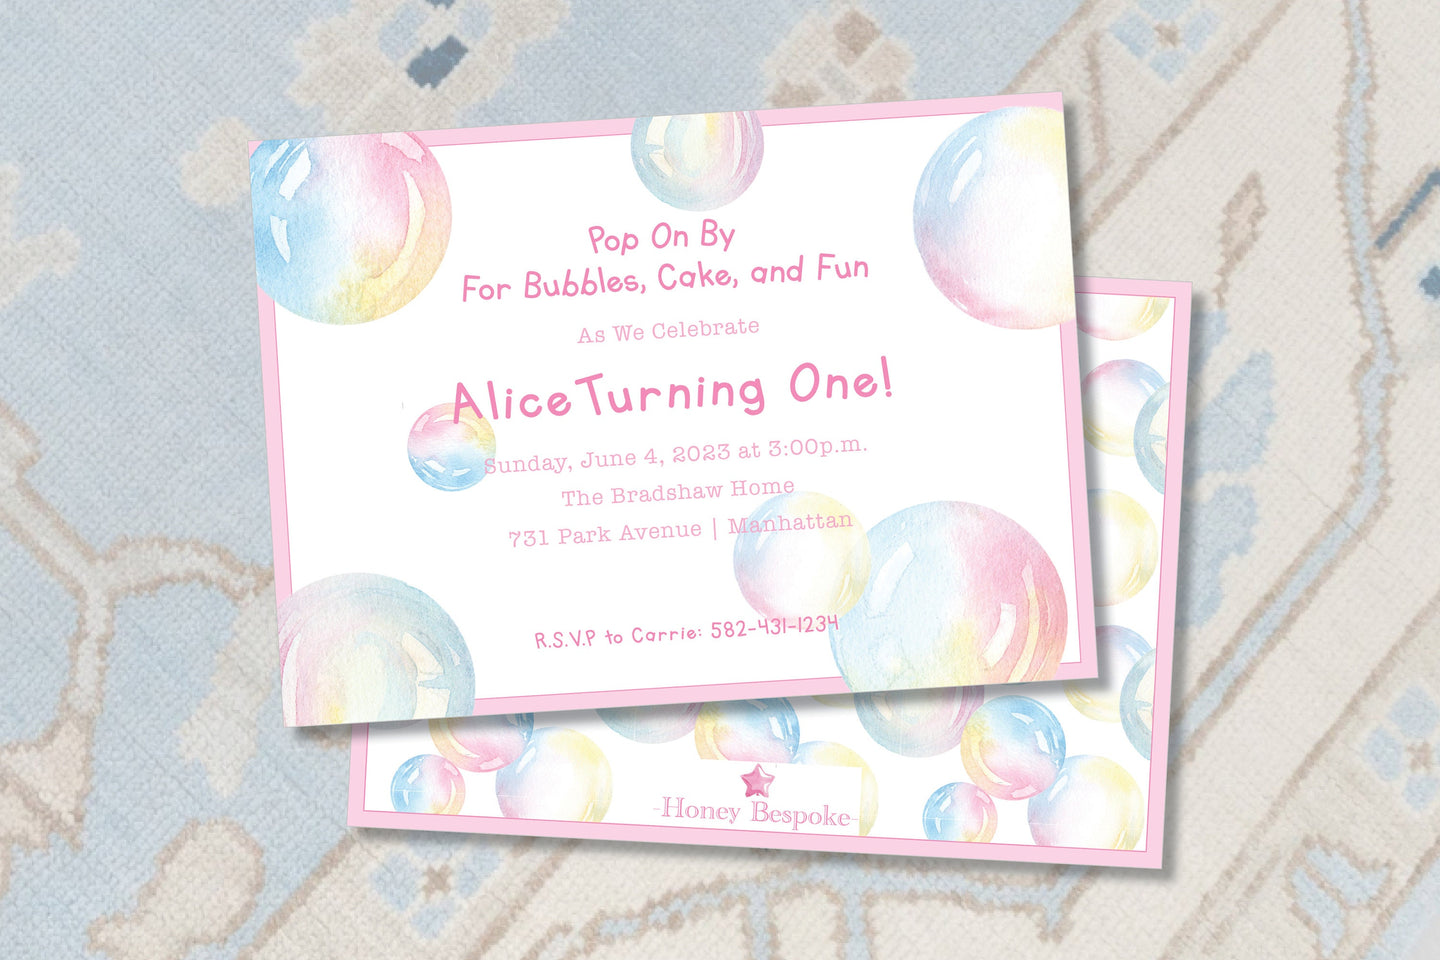 Bubble Party Birthday Invitation / Pop On By / Pop On Over / Bubble Birthday Party / Bubble Girls Birthday